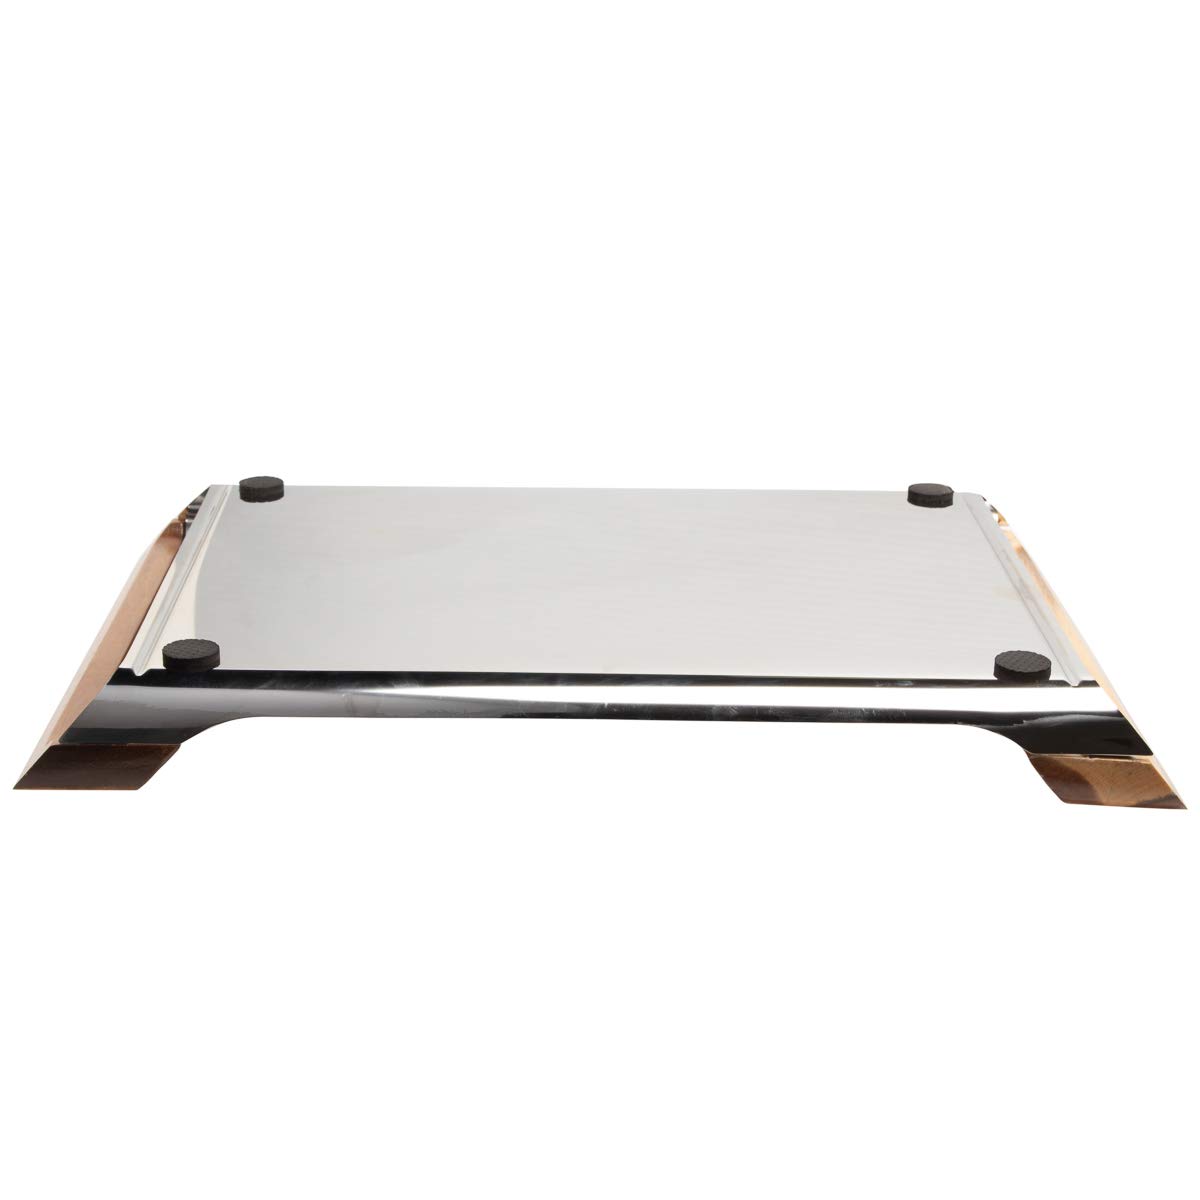 Savora Avenue Stainless Steel Bar Tray with Acacia Handles, 11" x 14", Silver